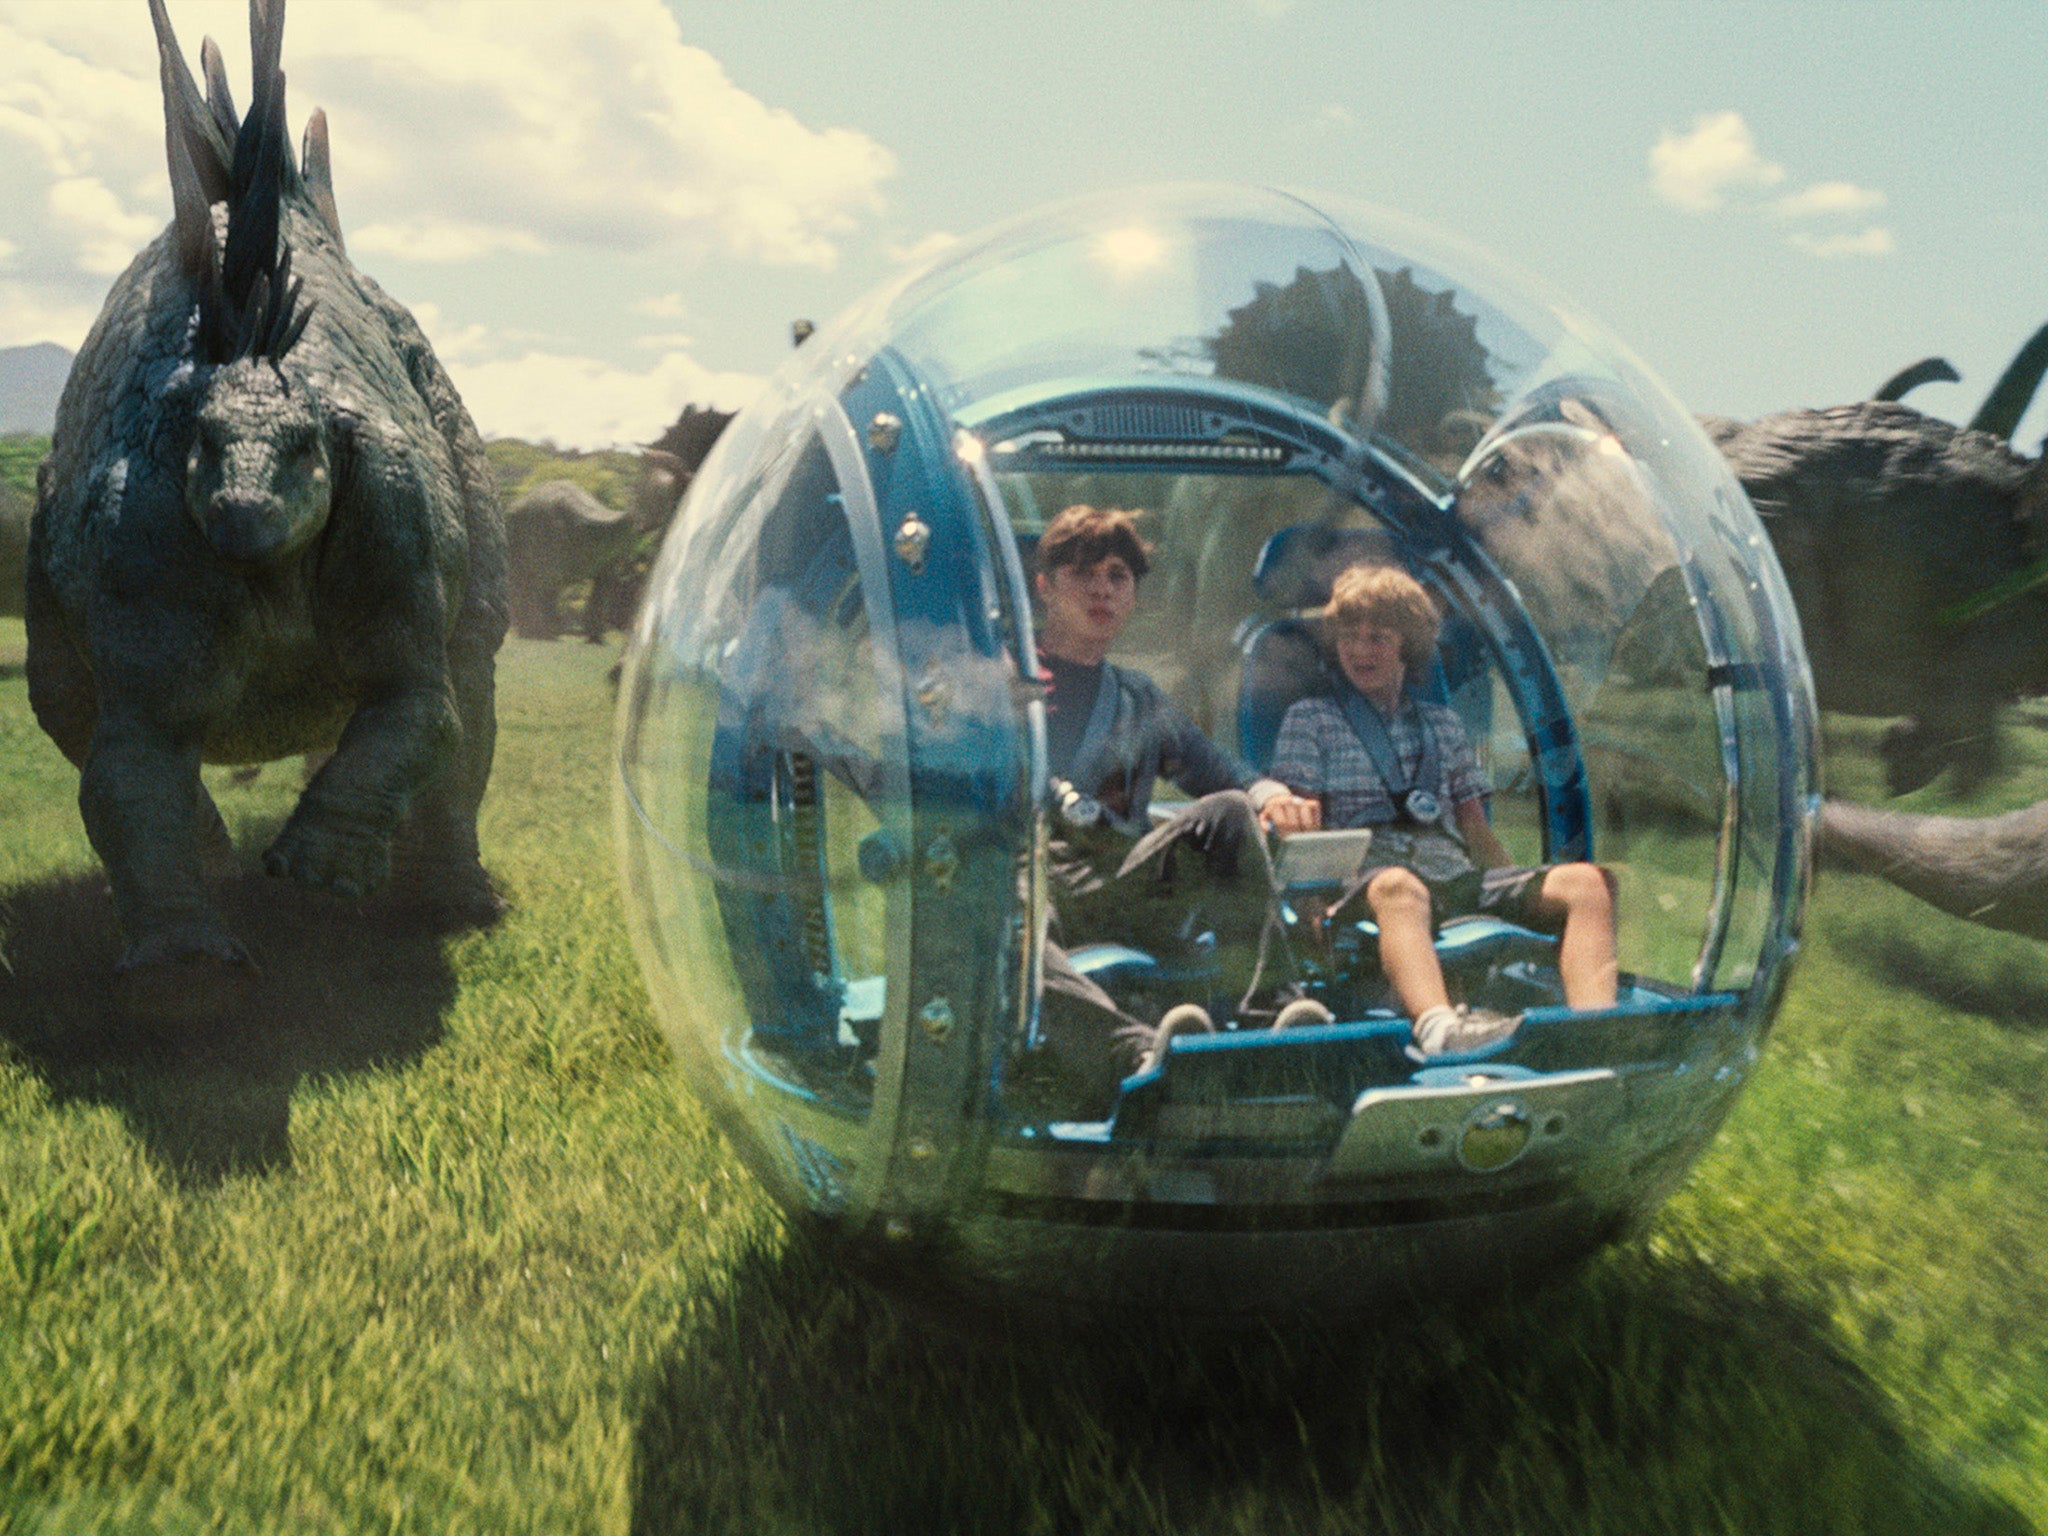 The sequel to 1993's Jurassic Park, Jurassic World, has stormed into the global record books to score the highest worldwide opening weekend in history.